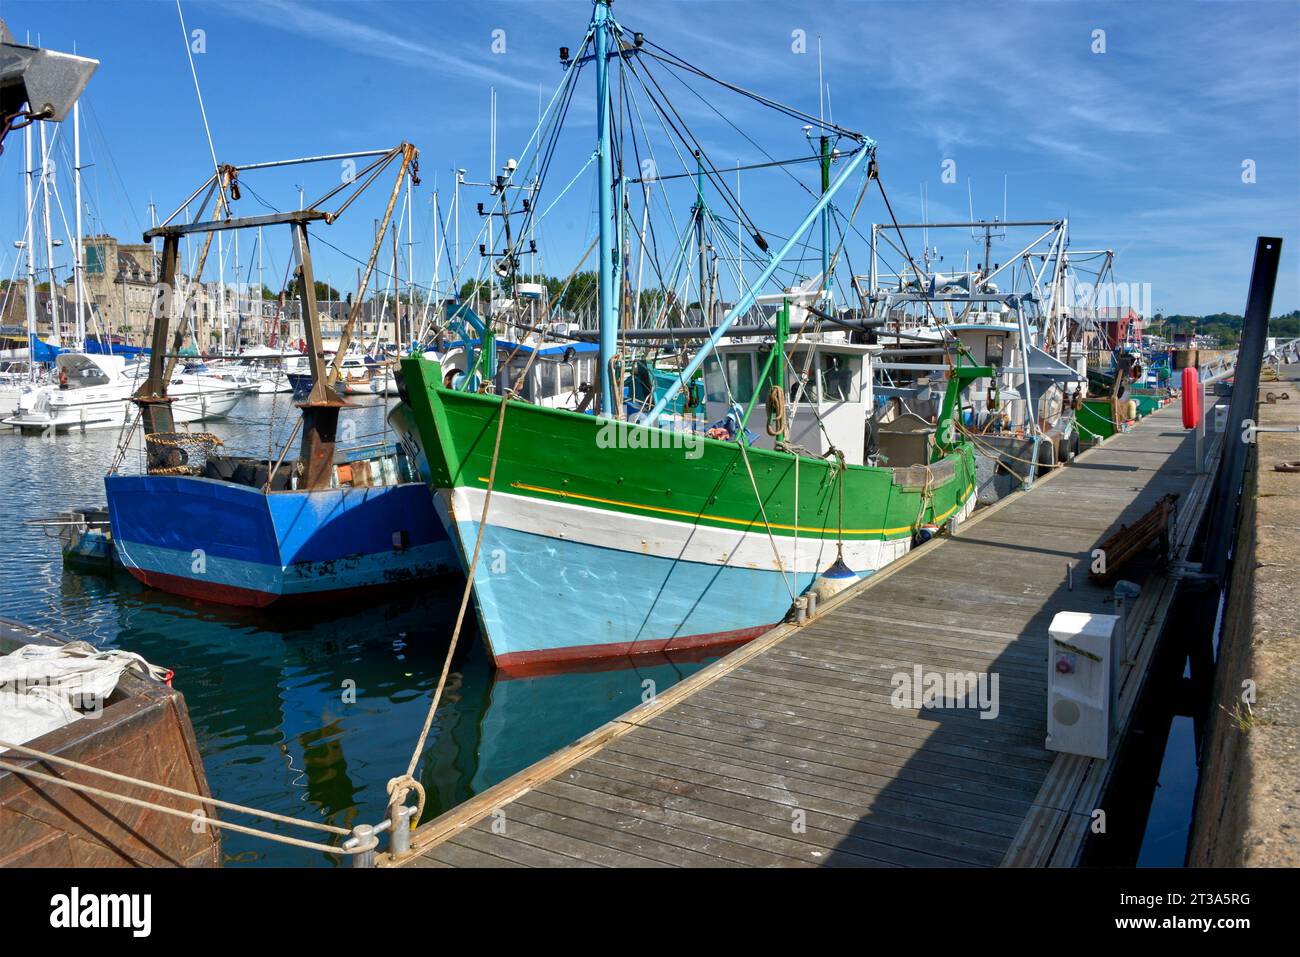 Fish boats in the port of Paimpol, a commune in the Côtes-d'Armor department in Brittany in northwestern France Stock Photo